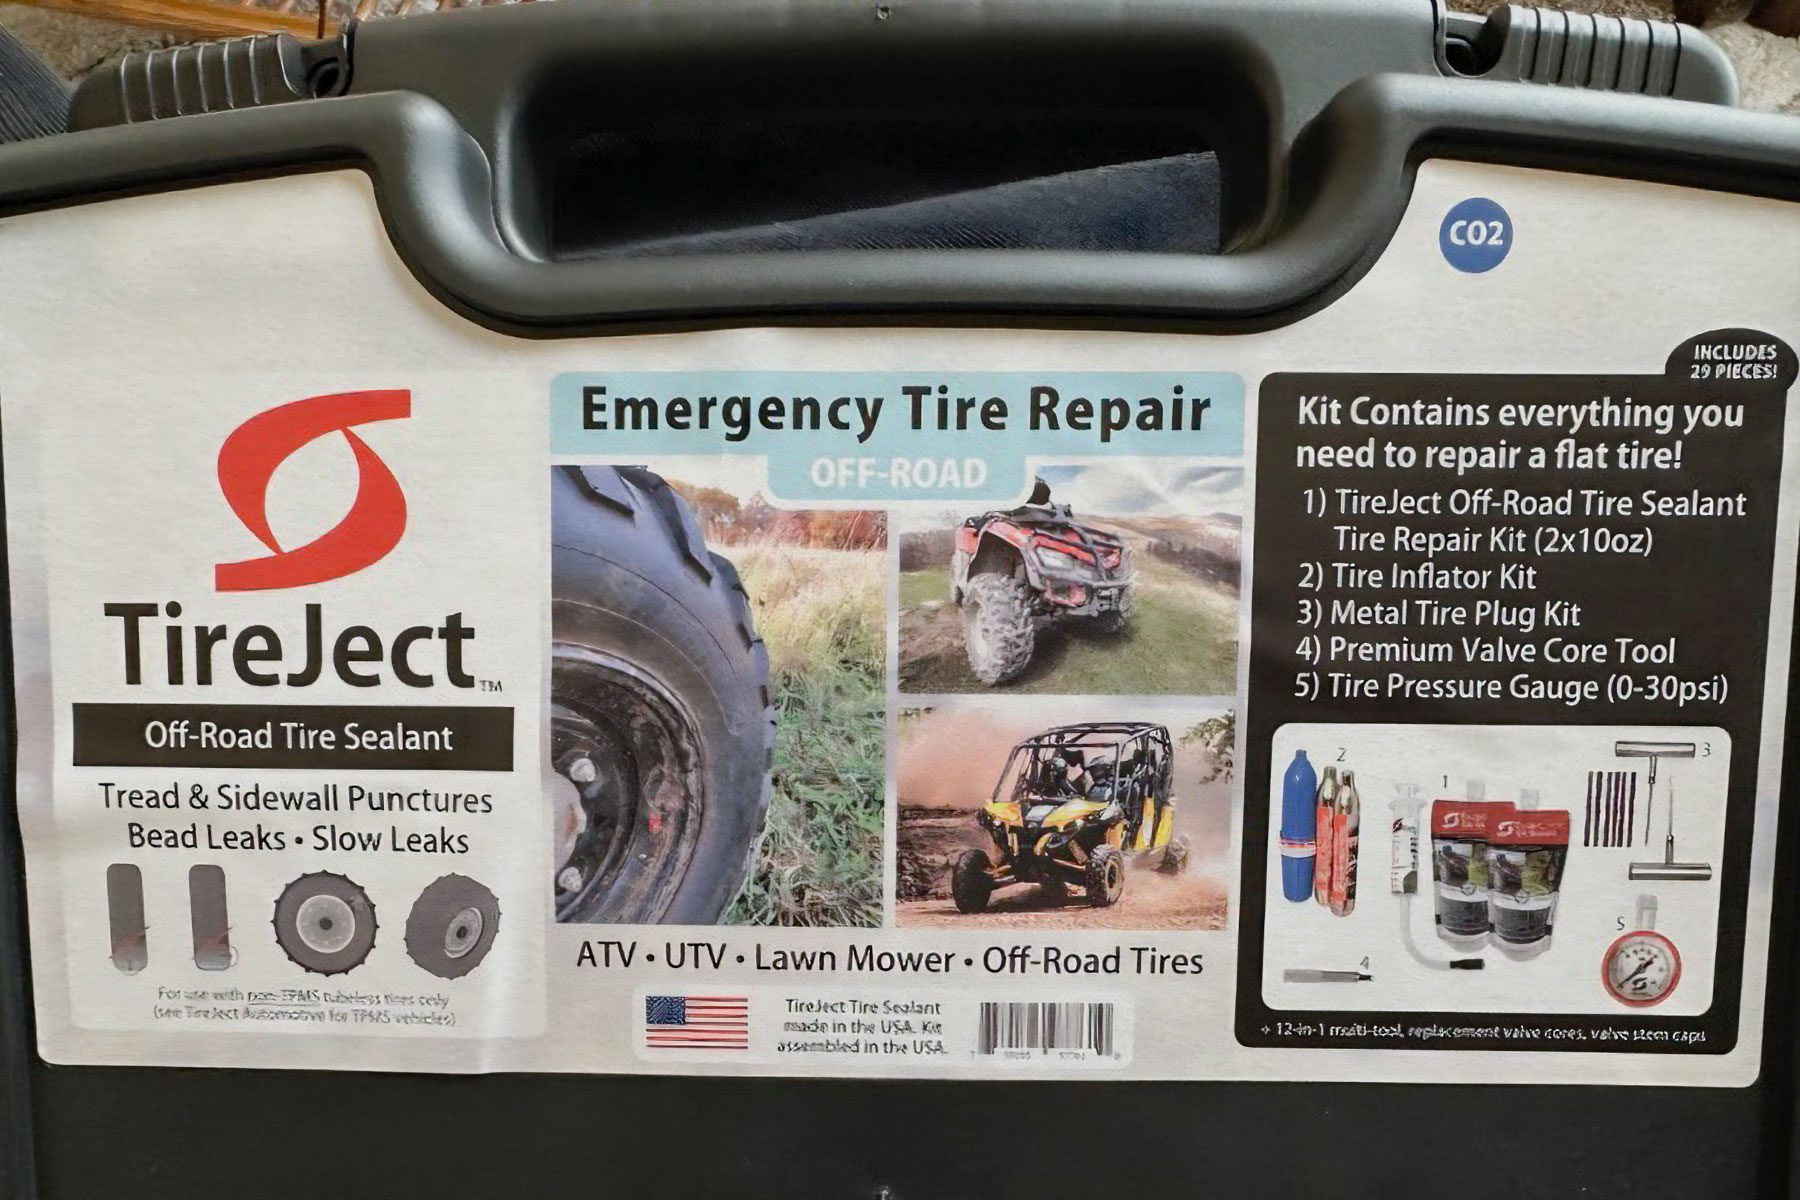 The box of Tireject All In One Off Road Tire Repair Tool Kit 